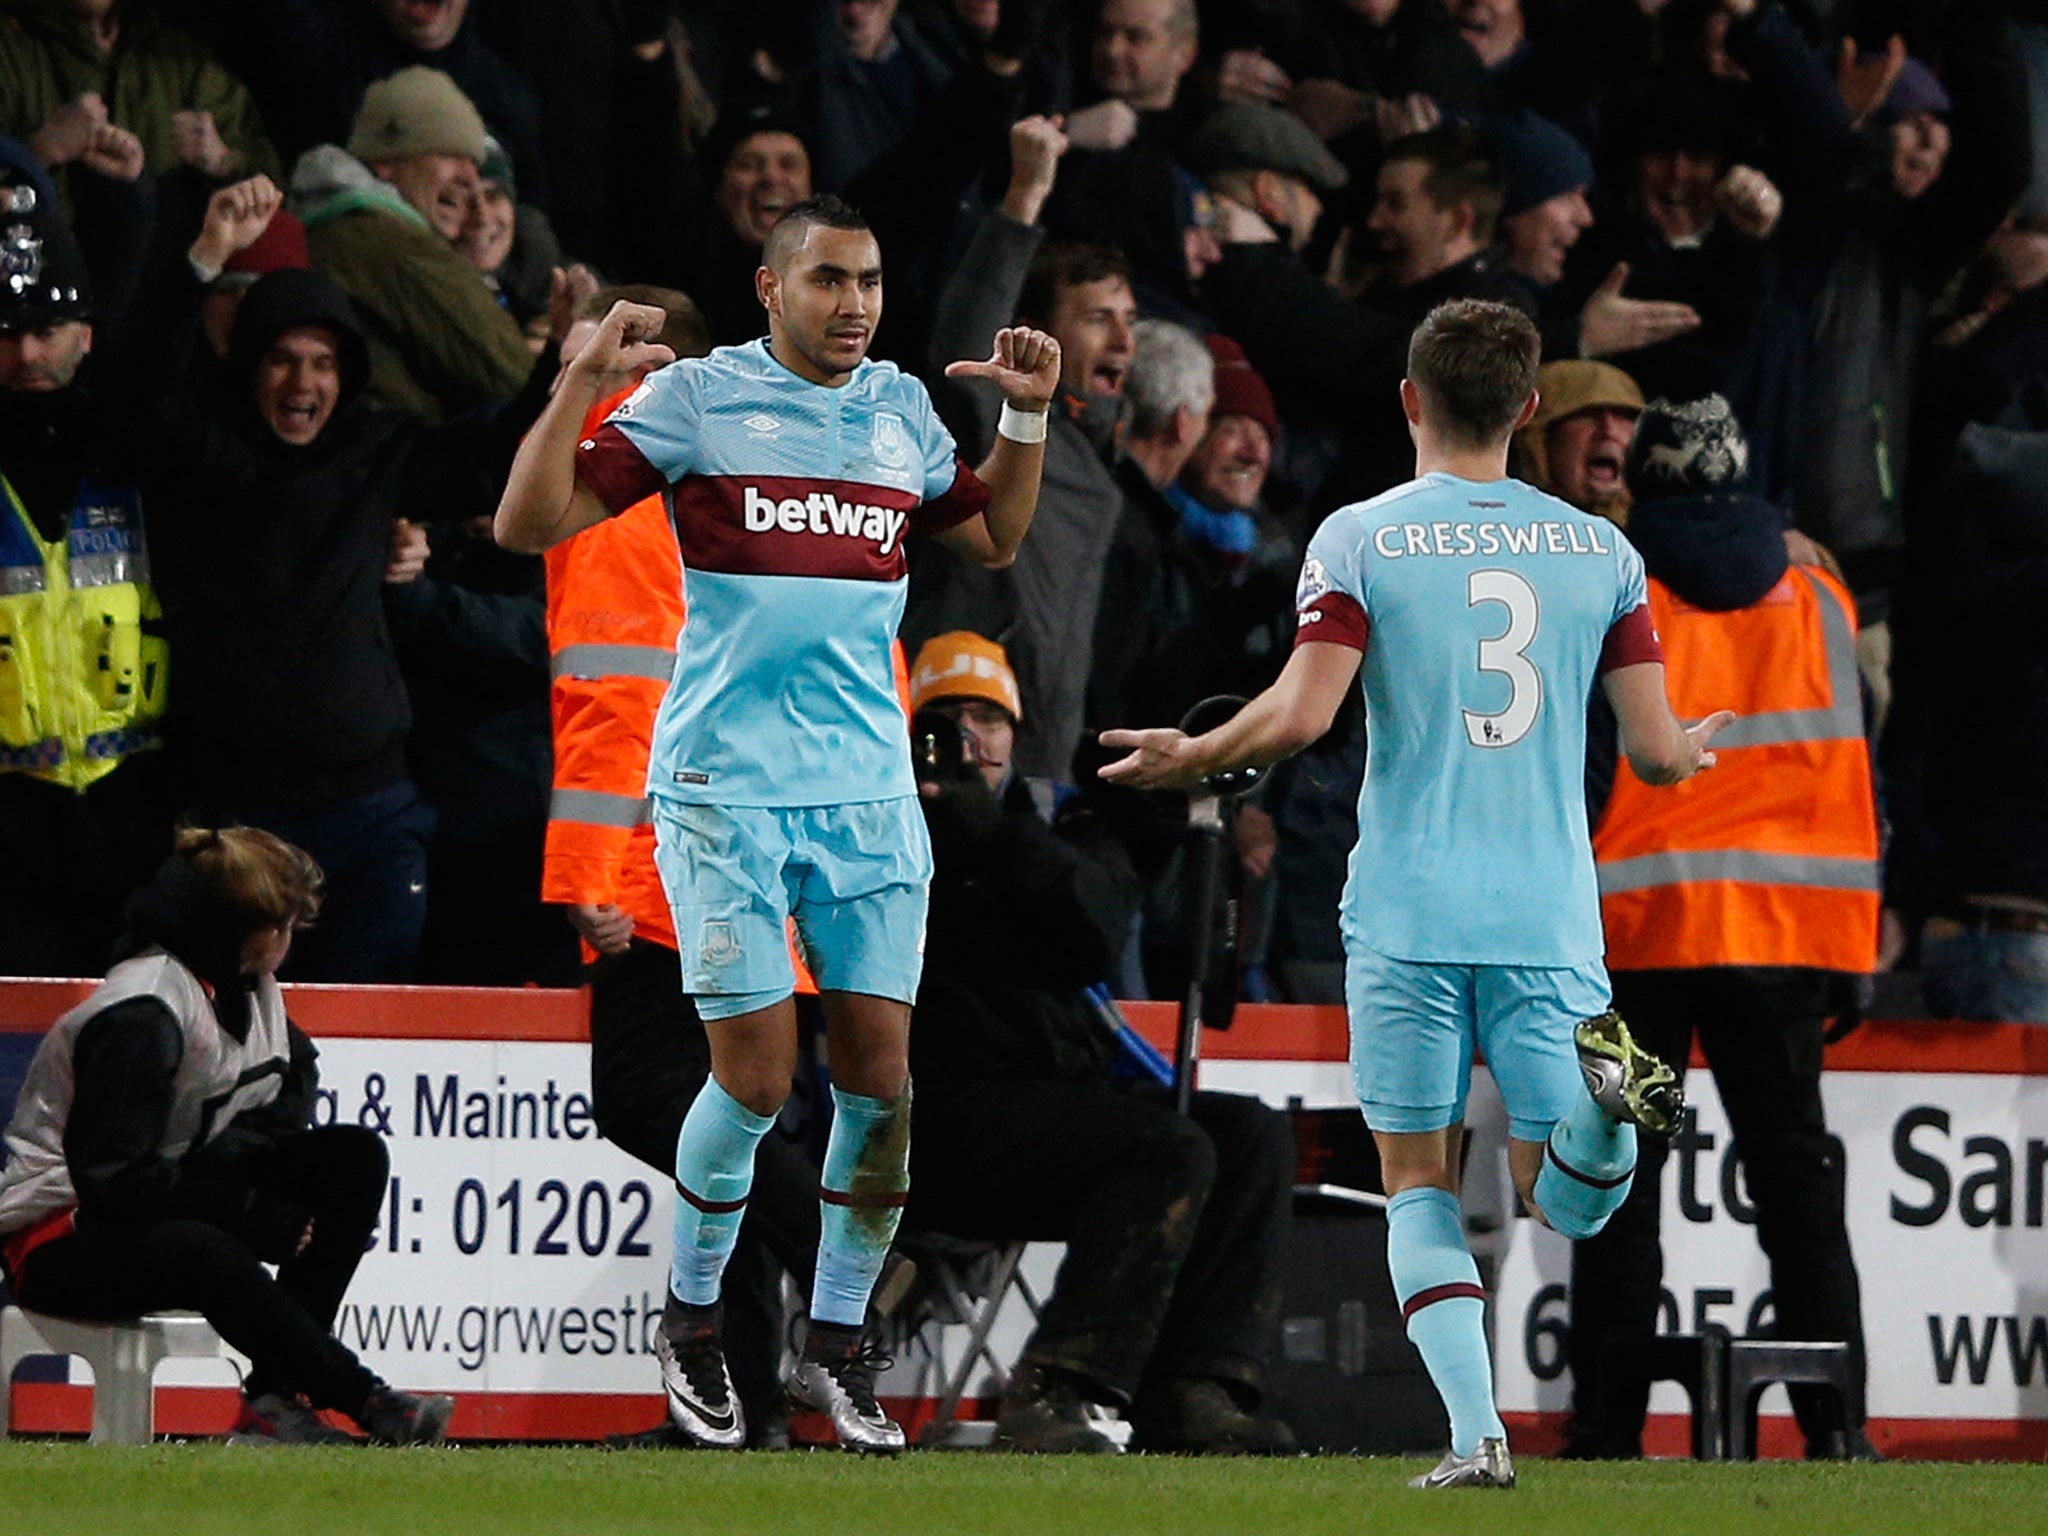 Dimitri Payet celebrates his goal in front of the West Ham fans